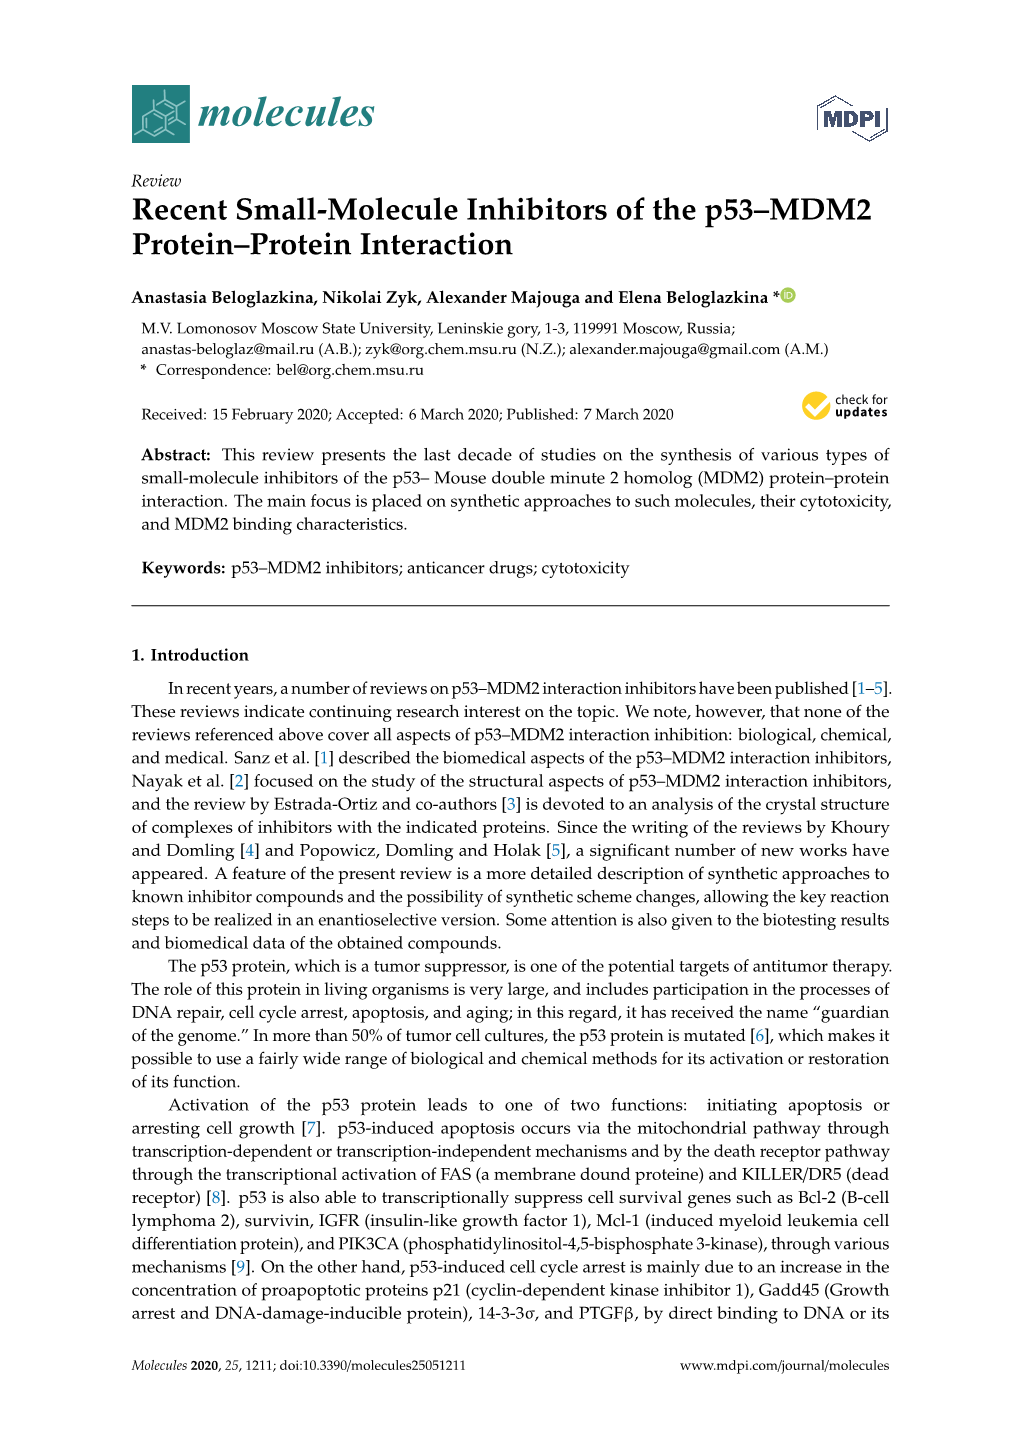 Recent Small-Molecule Inhibitors of the P53–MDM2 Protein–Protein Interaction